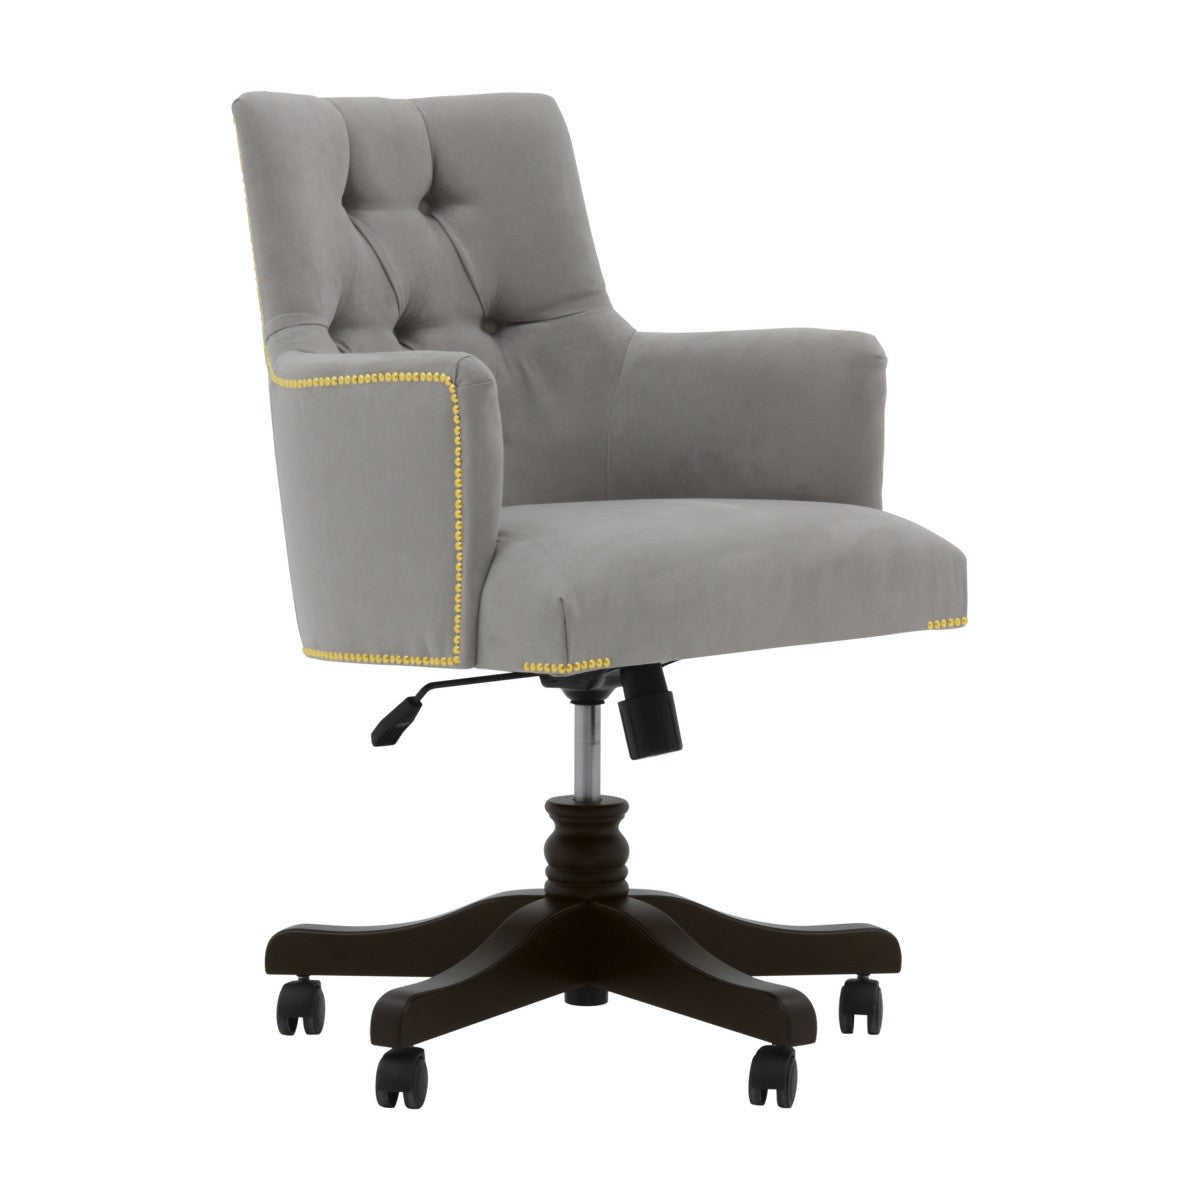 Edward Bespoke Upholstered Luxury Executive Swivel Office Desk Chair MS810A Custom Made To Order